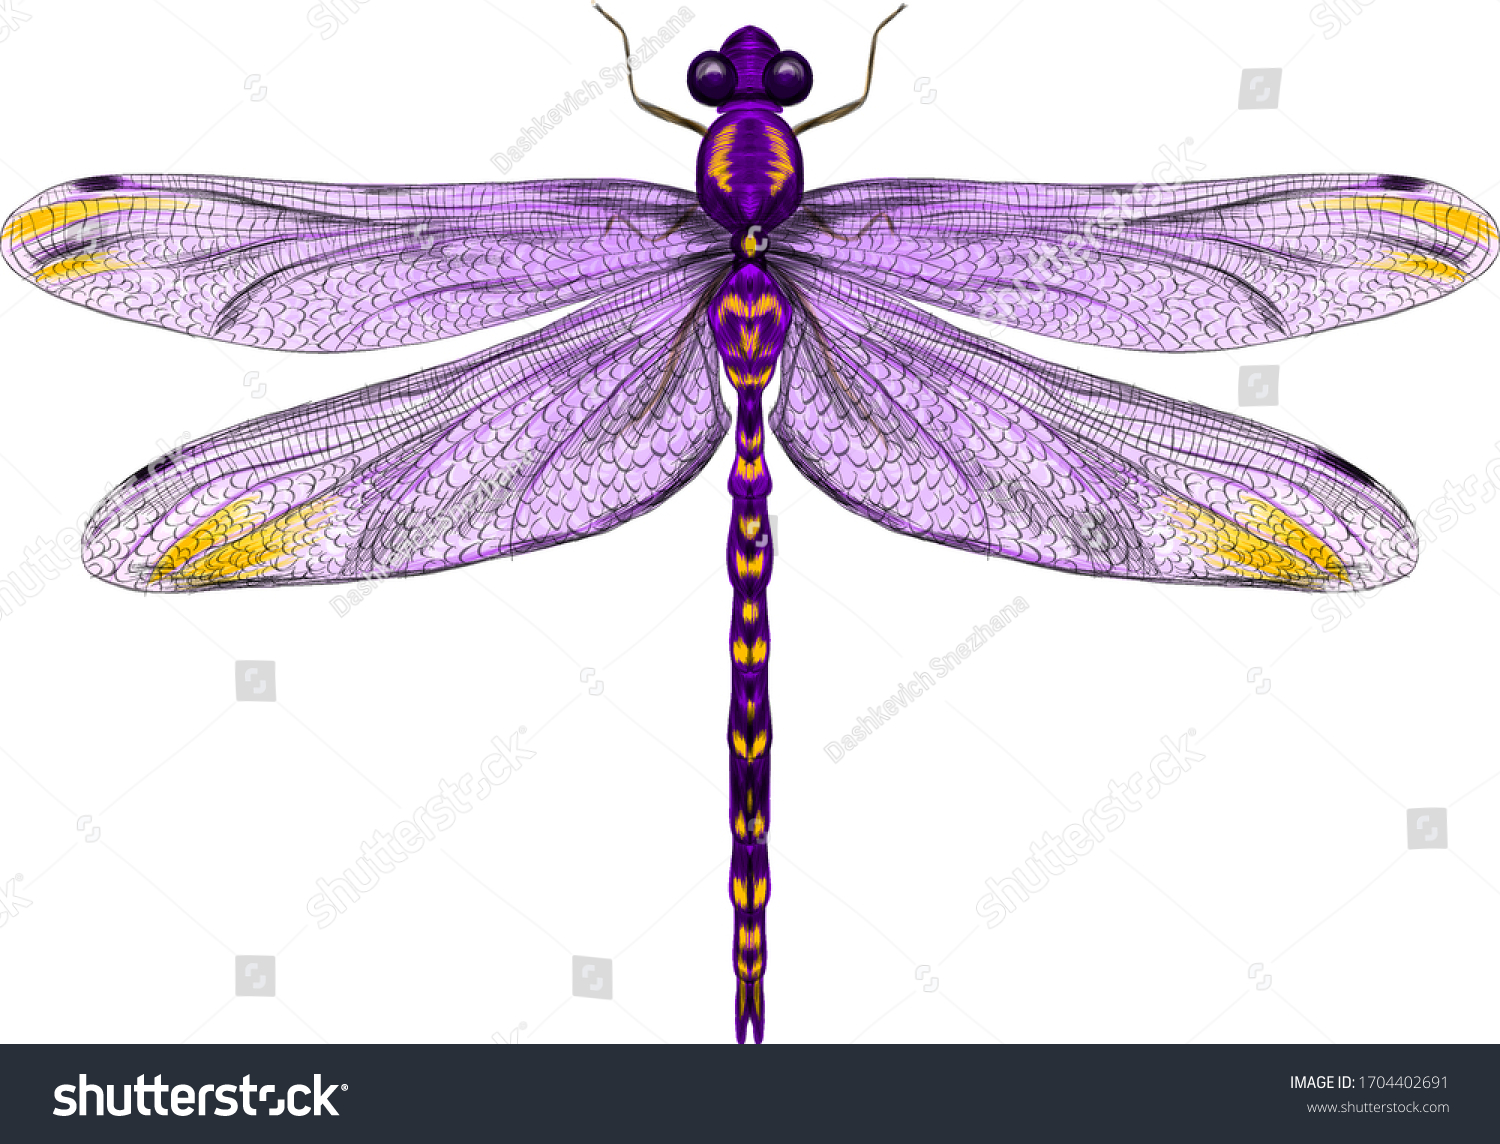 purple dragonfly with delicate wings vector illustration  #1704402691